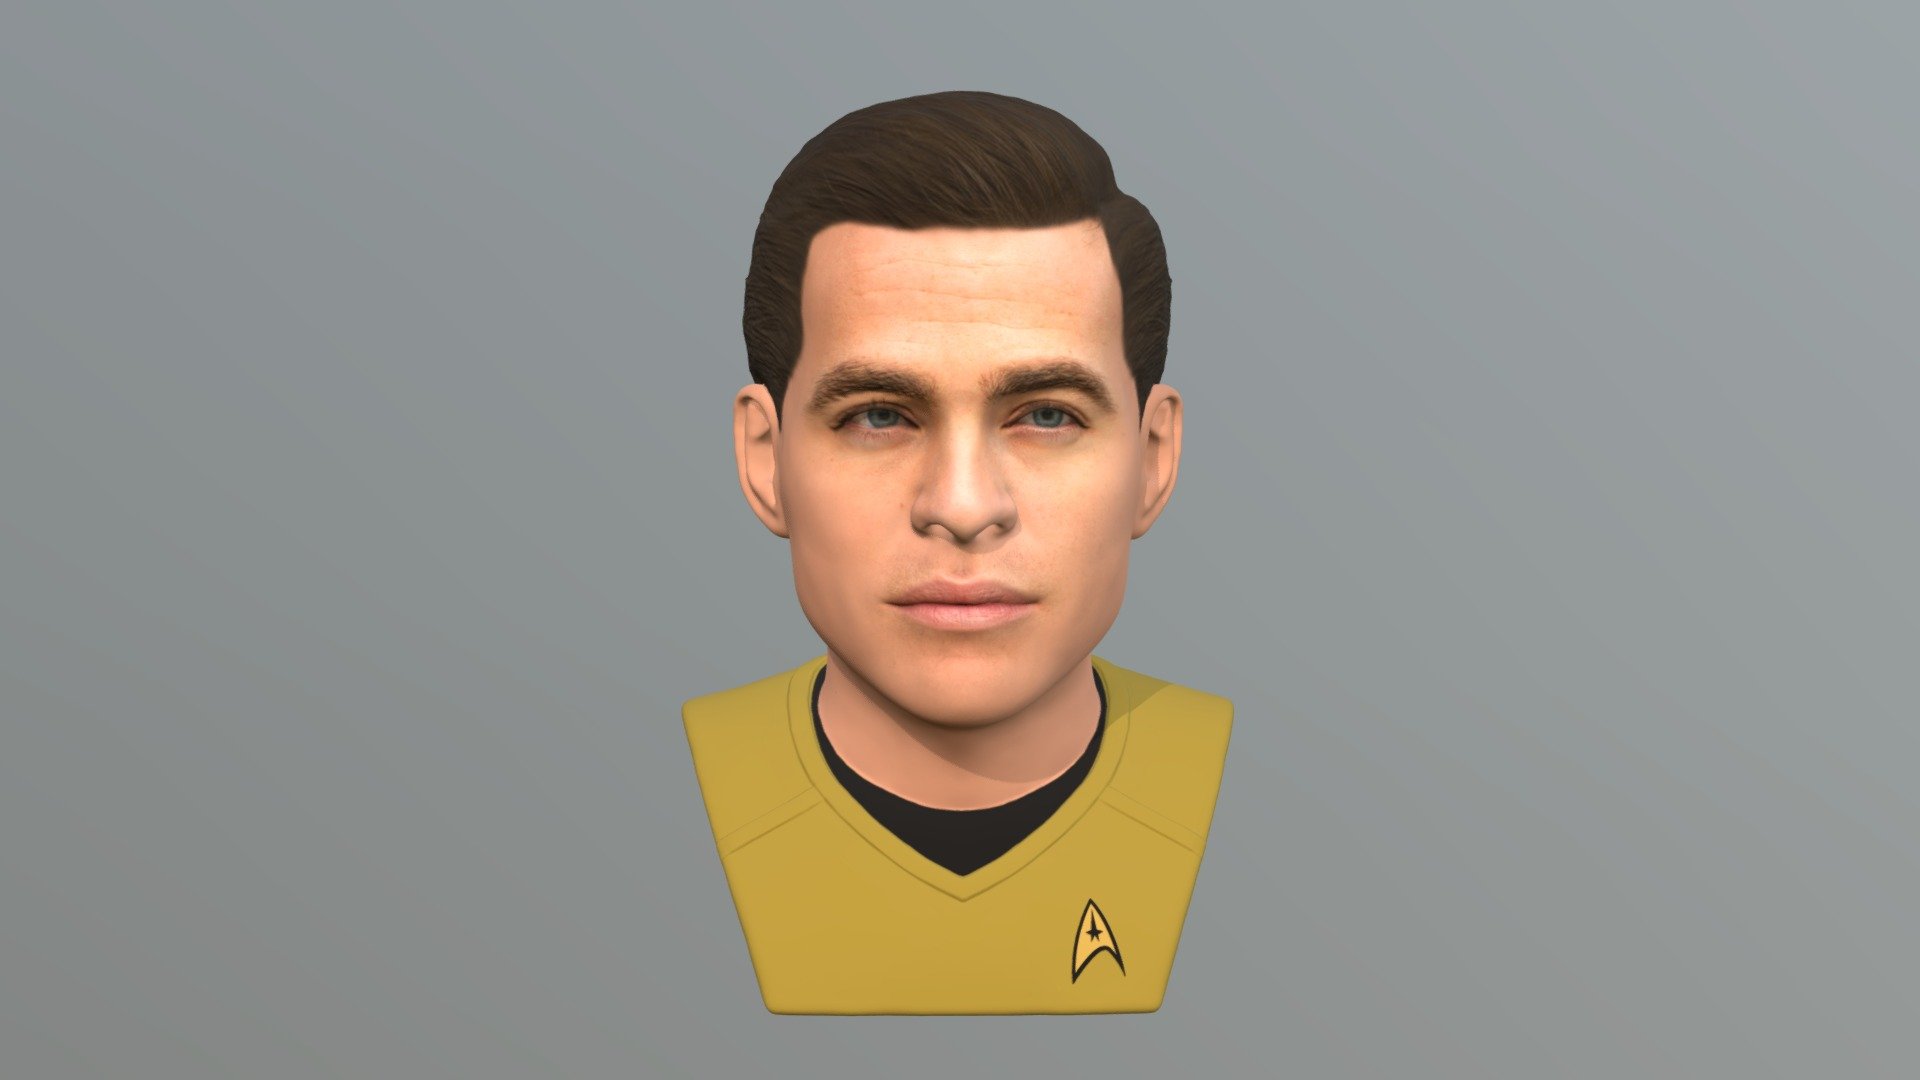 Here is Captain Kirk (Chris Pine) from Star Trek bust 3D model ready for full color 3D printing. The model current size is 5 cm height, but you are free to scale it. 
Zip file contains obj with texture in png. 
The model was created in ZBrush, Mudbox and Photoshop.

If you have any questions please don't hesitate to contact me. I will respond you ASAP. 
I encourage you to check my other celebrity 3D models 3d model